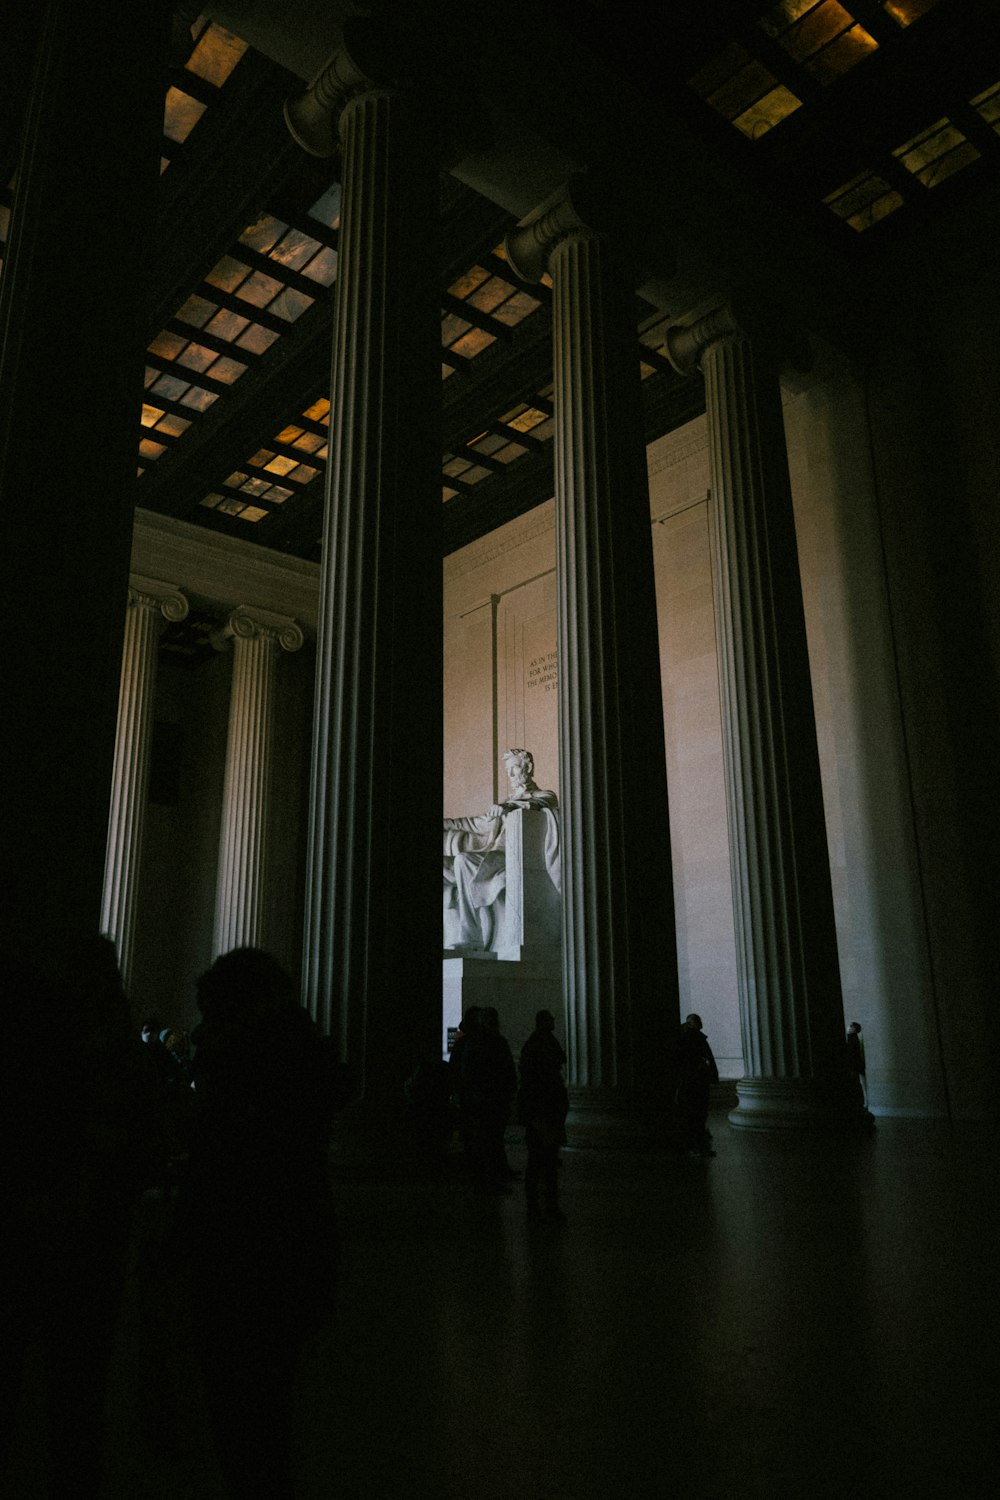 a group of people standing in a room with columns